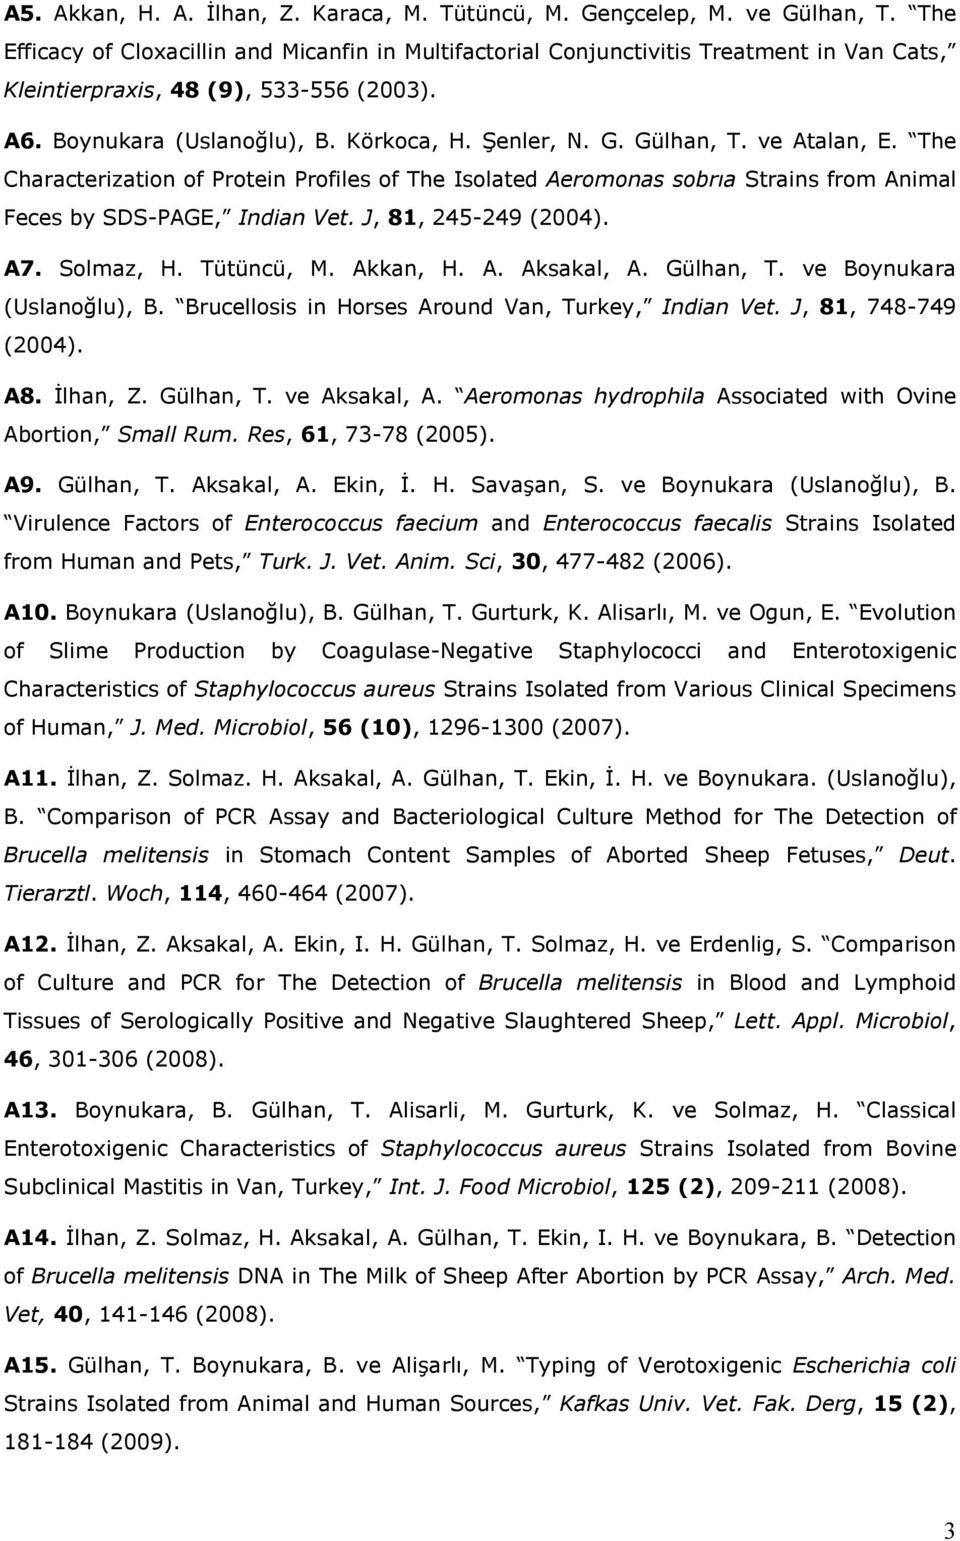 Gülhan, T. ve Atalan, E. The Characterization of Protein Profiles of The Isolated Aeromonas sobrıa Strains from Animal Feces by SDS-PAGE, Indian Vet. J, 81, 245-249 (2004). A7. Solmaz, H. Tütüncü, M.